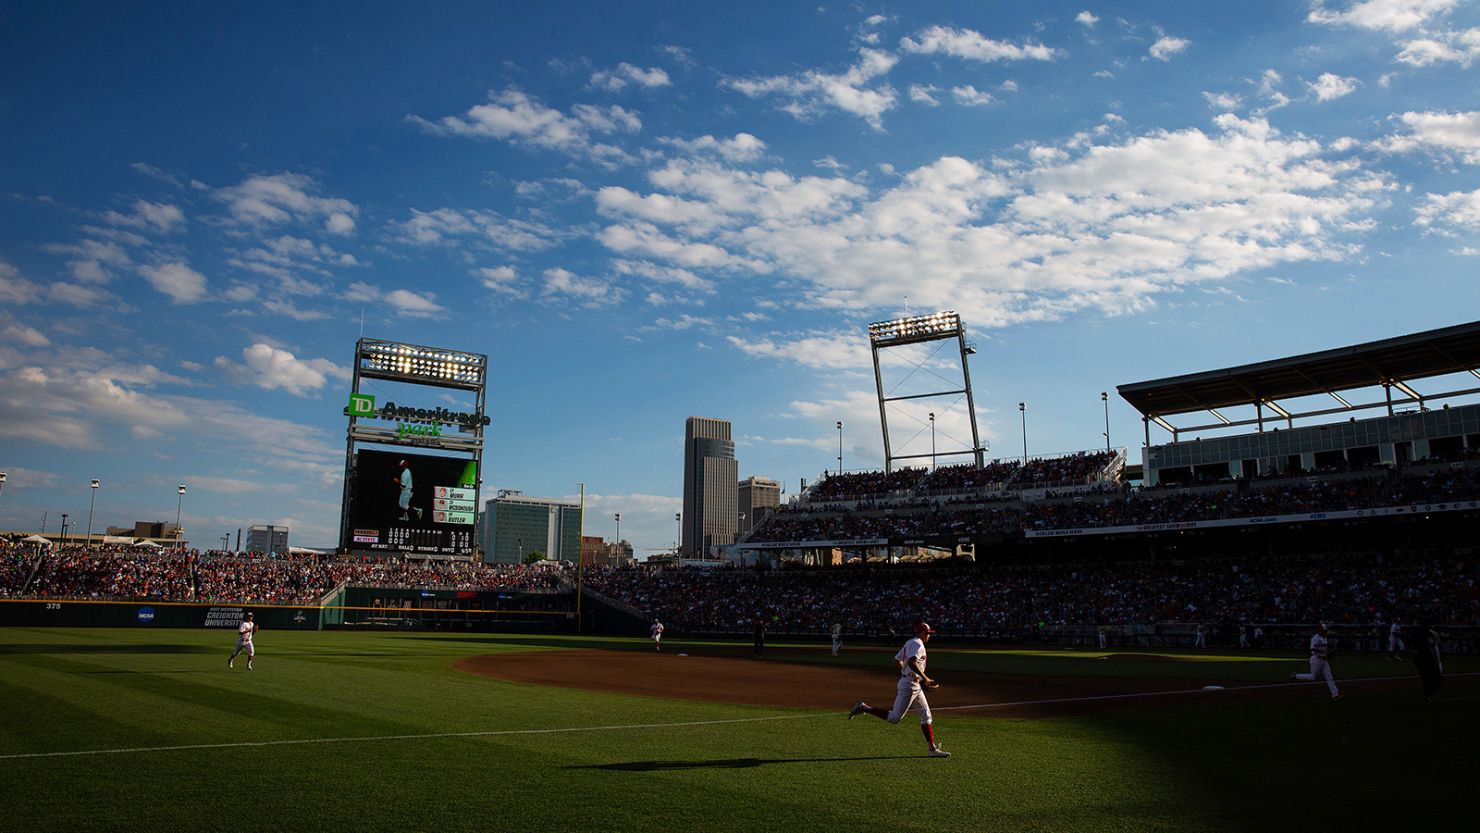 North Carolina State players return to the dugout after closing the fourth inning against Vanderbilt during a baseball game in the College World Series, Monday, June 21, 2021, at TD Ameritrade Park in Omaha, Nebraska.